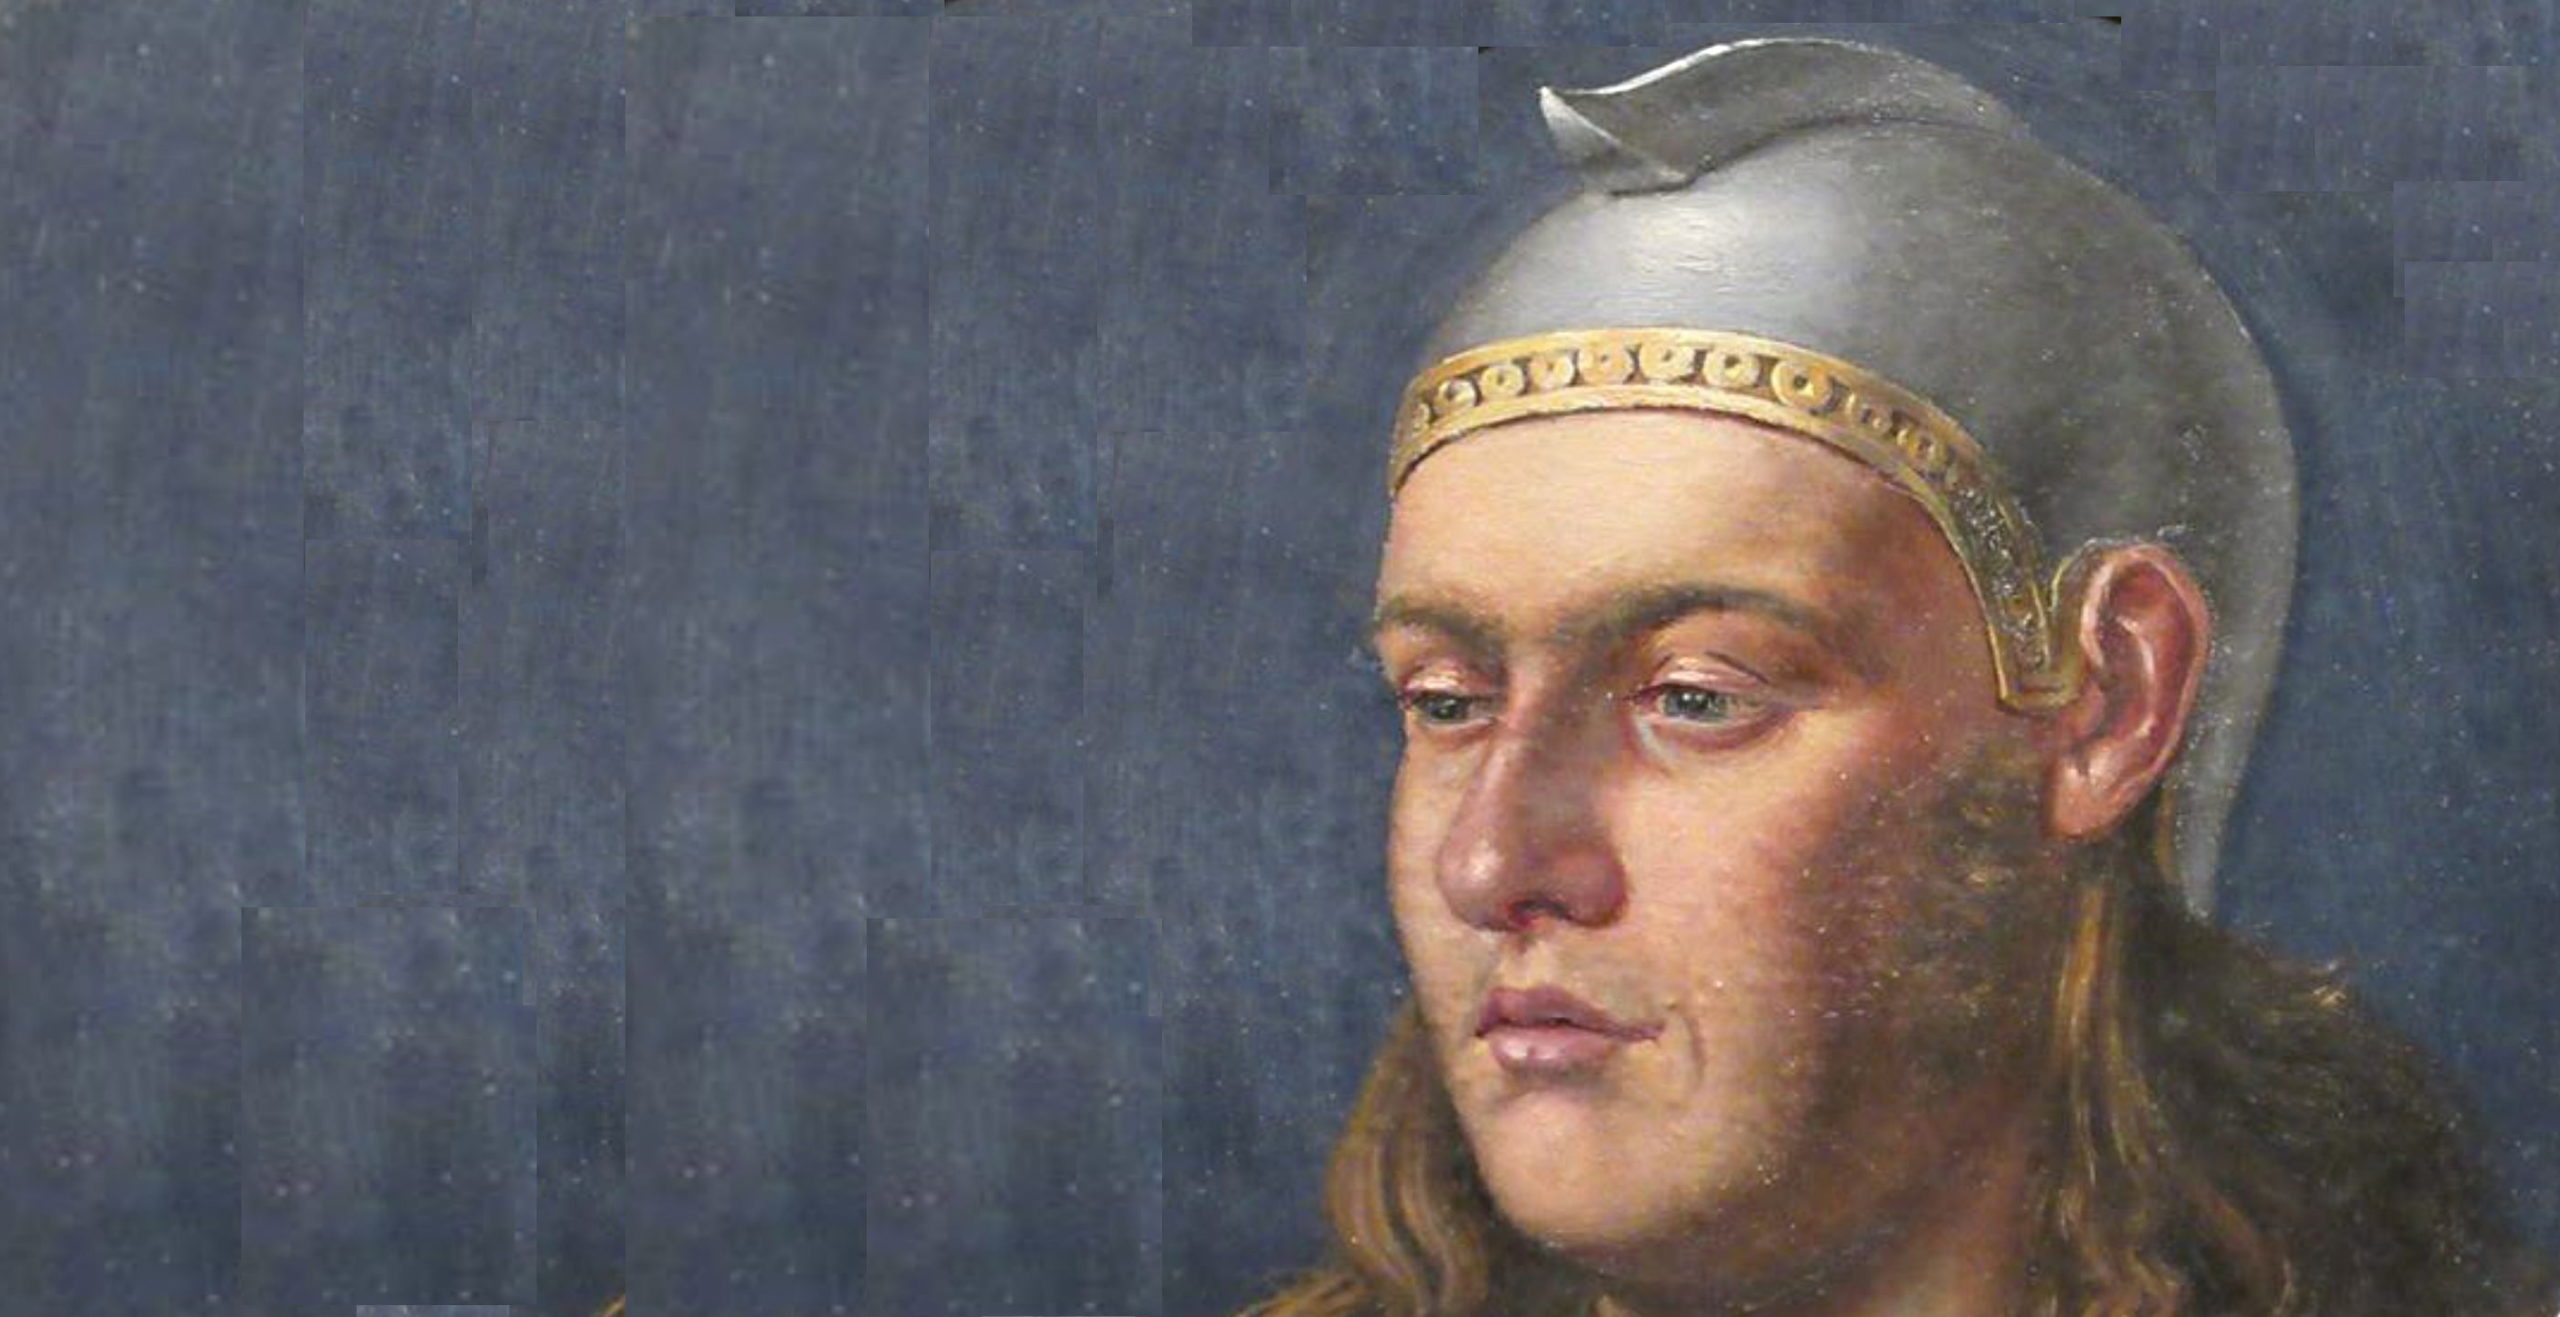 On This Day In History: Canute - Cnut The Great - Danish King Of